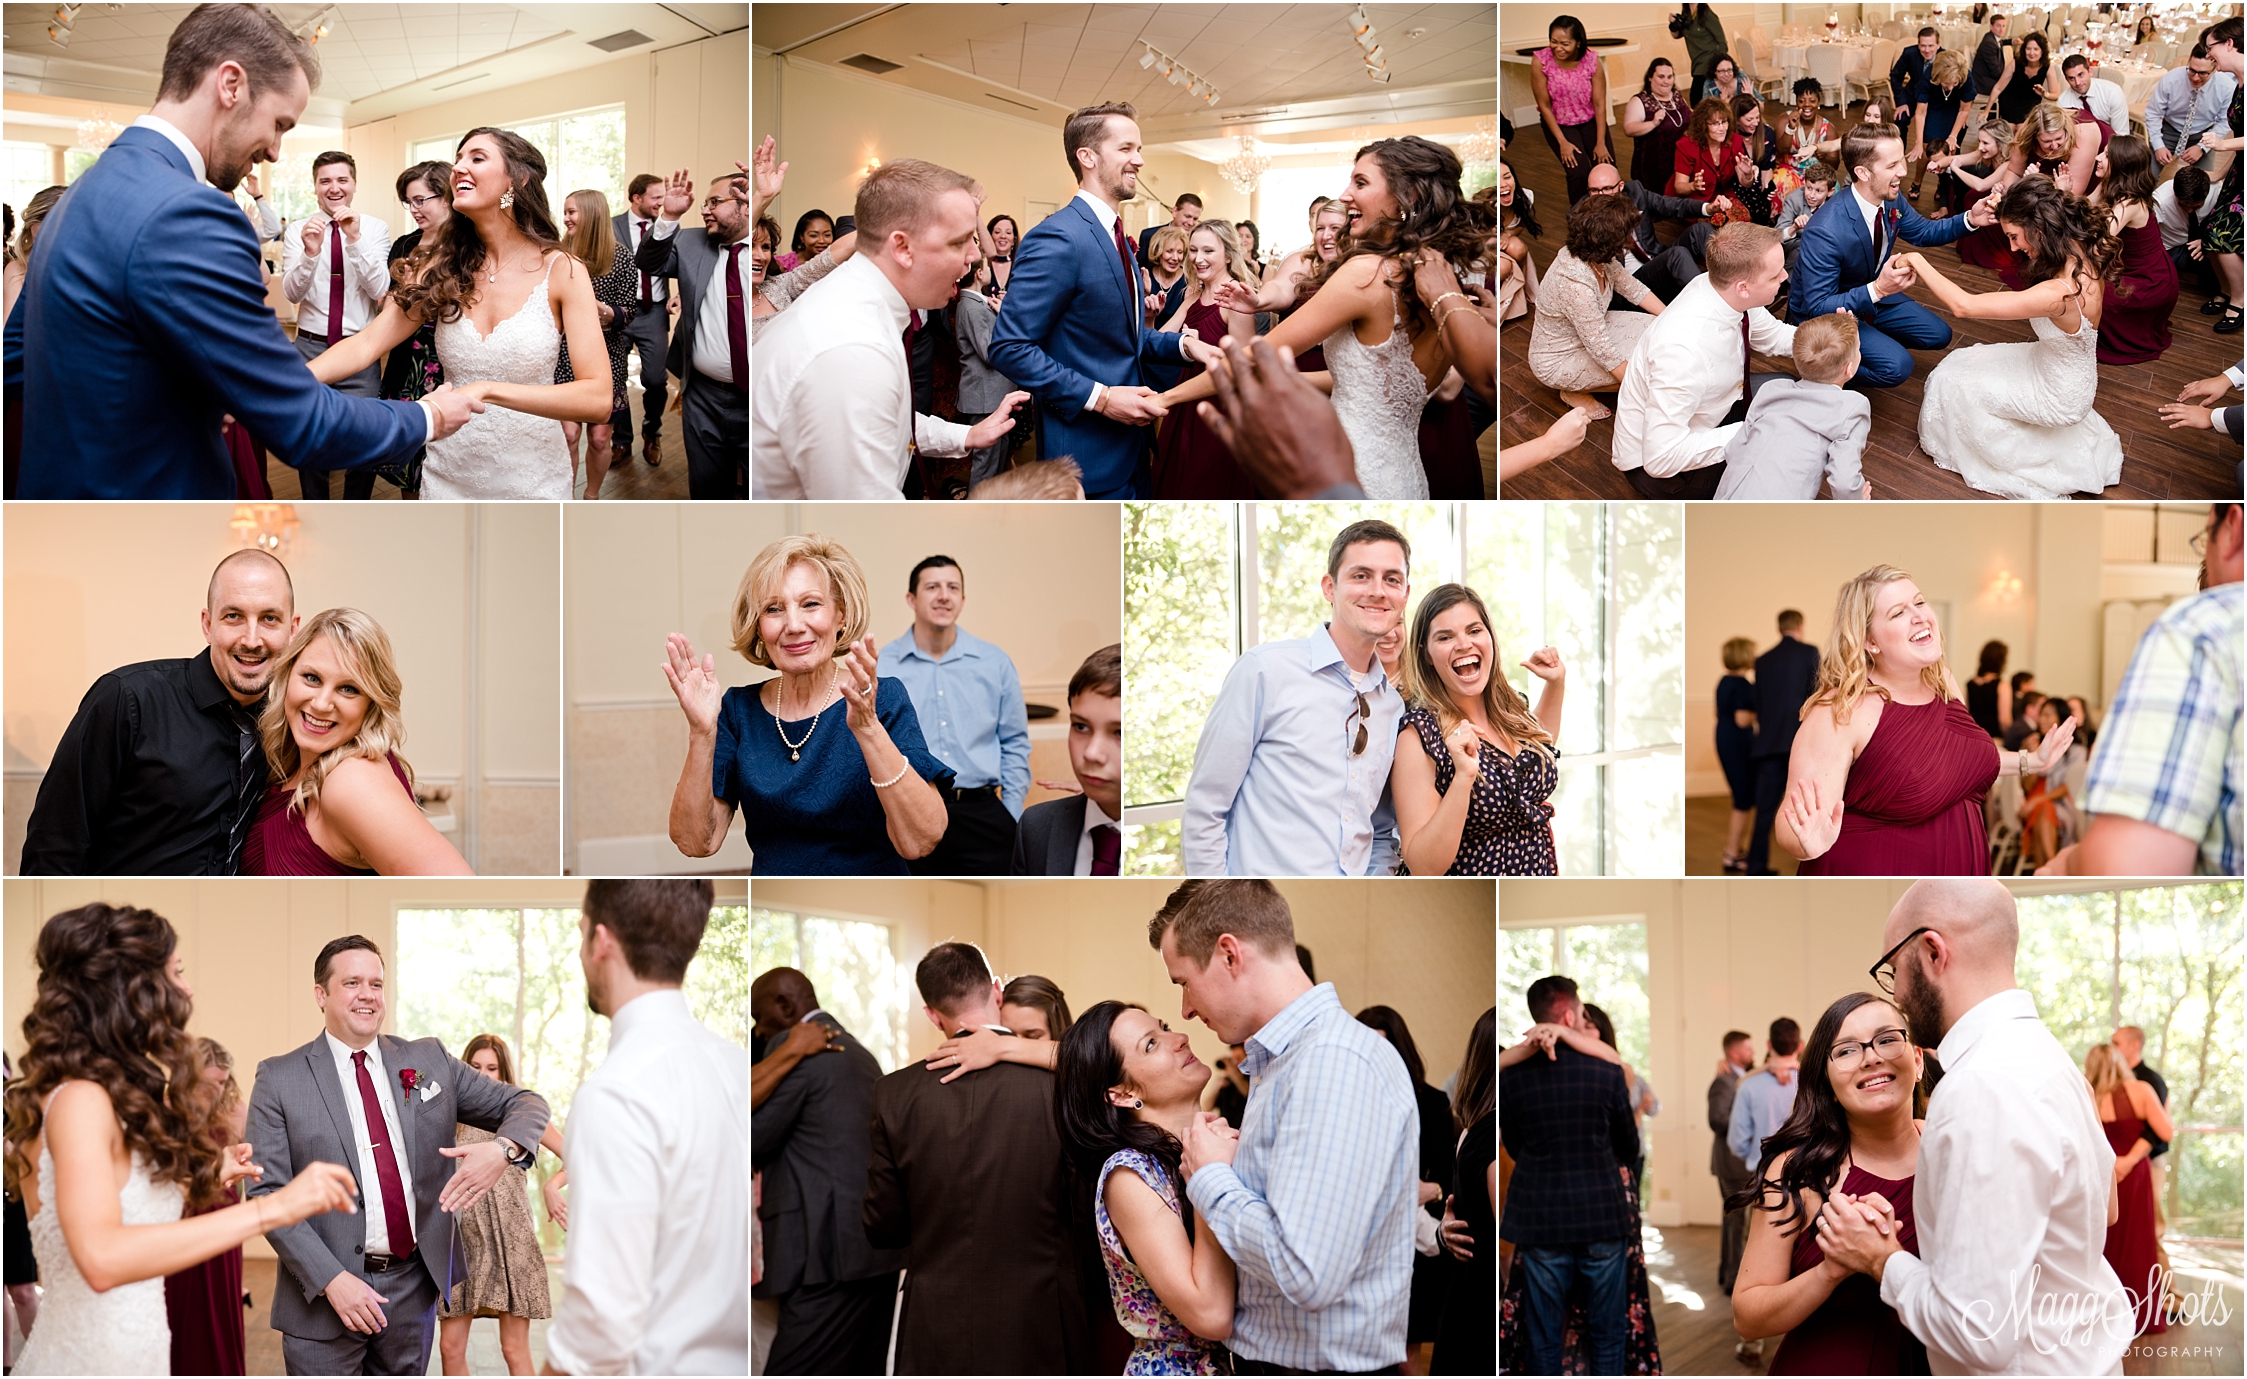 Bride and Groom, Love, Husband and Wife, Dance, Wedding, Professional Photographer, Professional Photography, Beautiful, DFW Wedding Photographer, MaggShots Photography, MaggShots, Dancing, Party, Reception